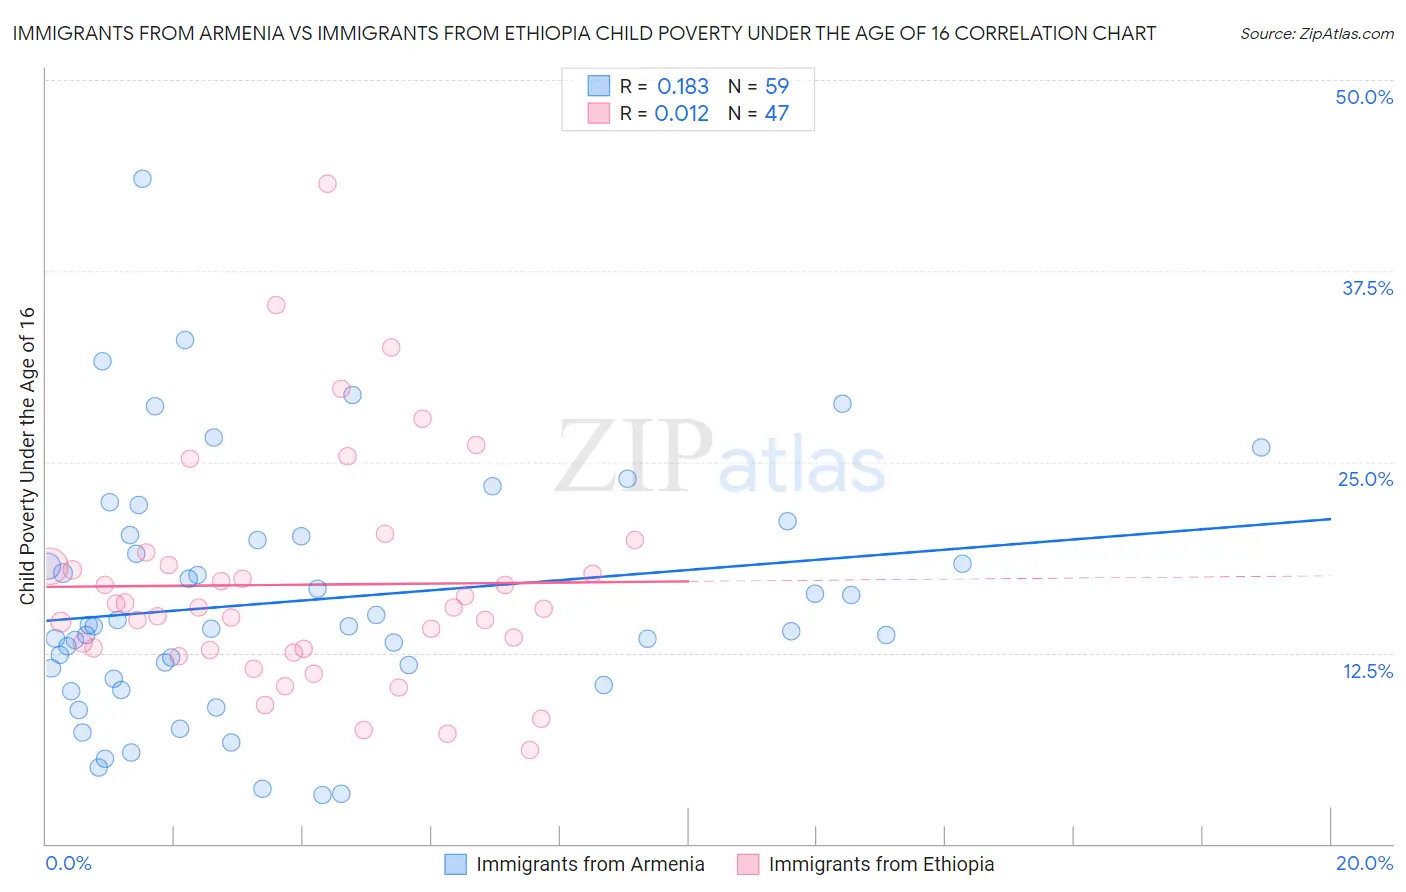 Immigrants from Armenia vs Immigrants from Ethiopia Child Poverty Under the Age of 16